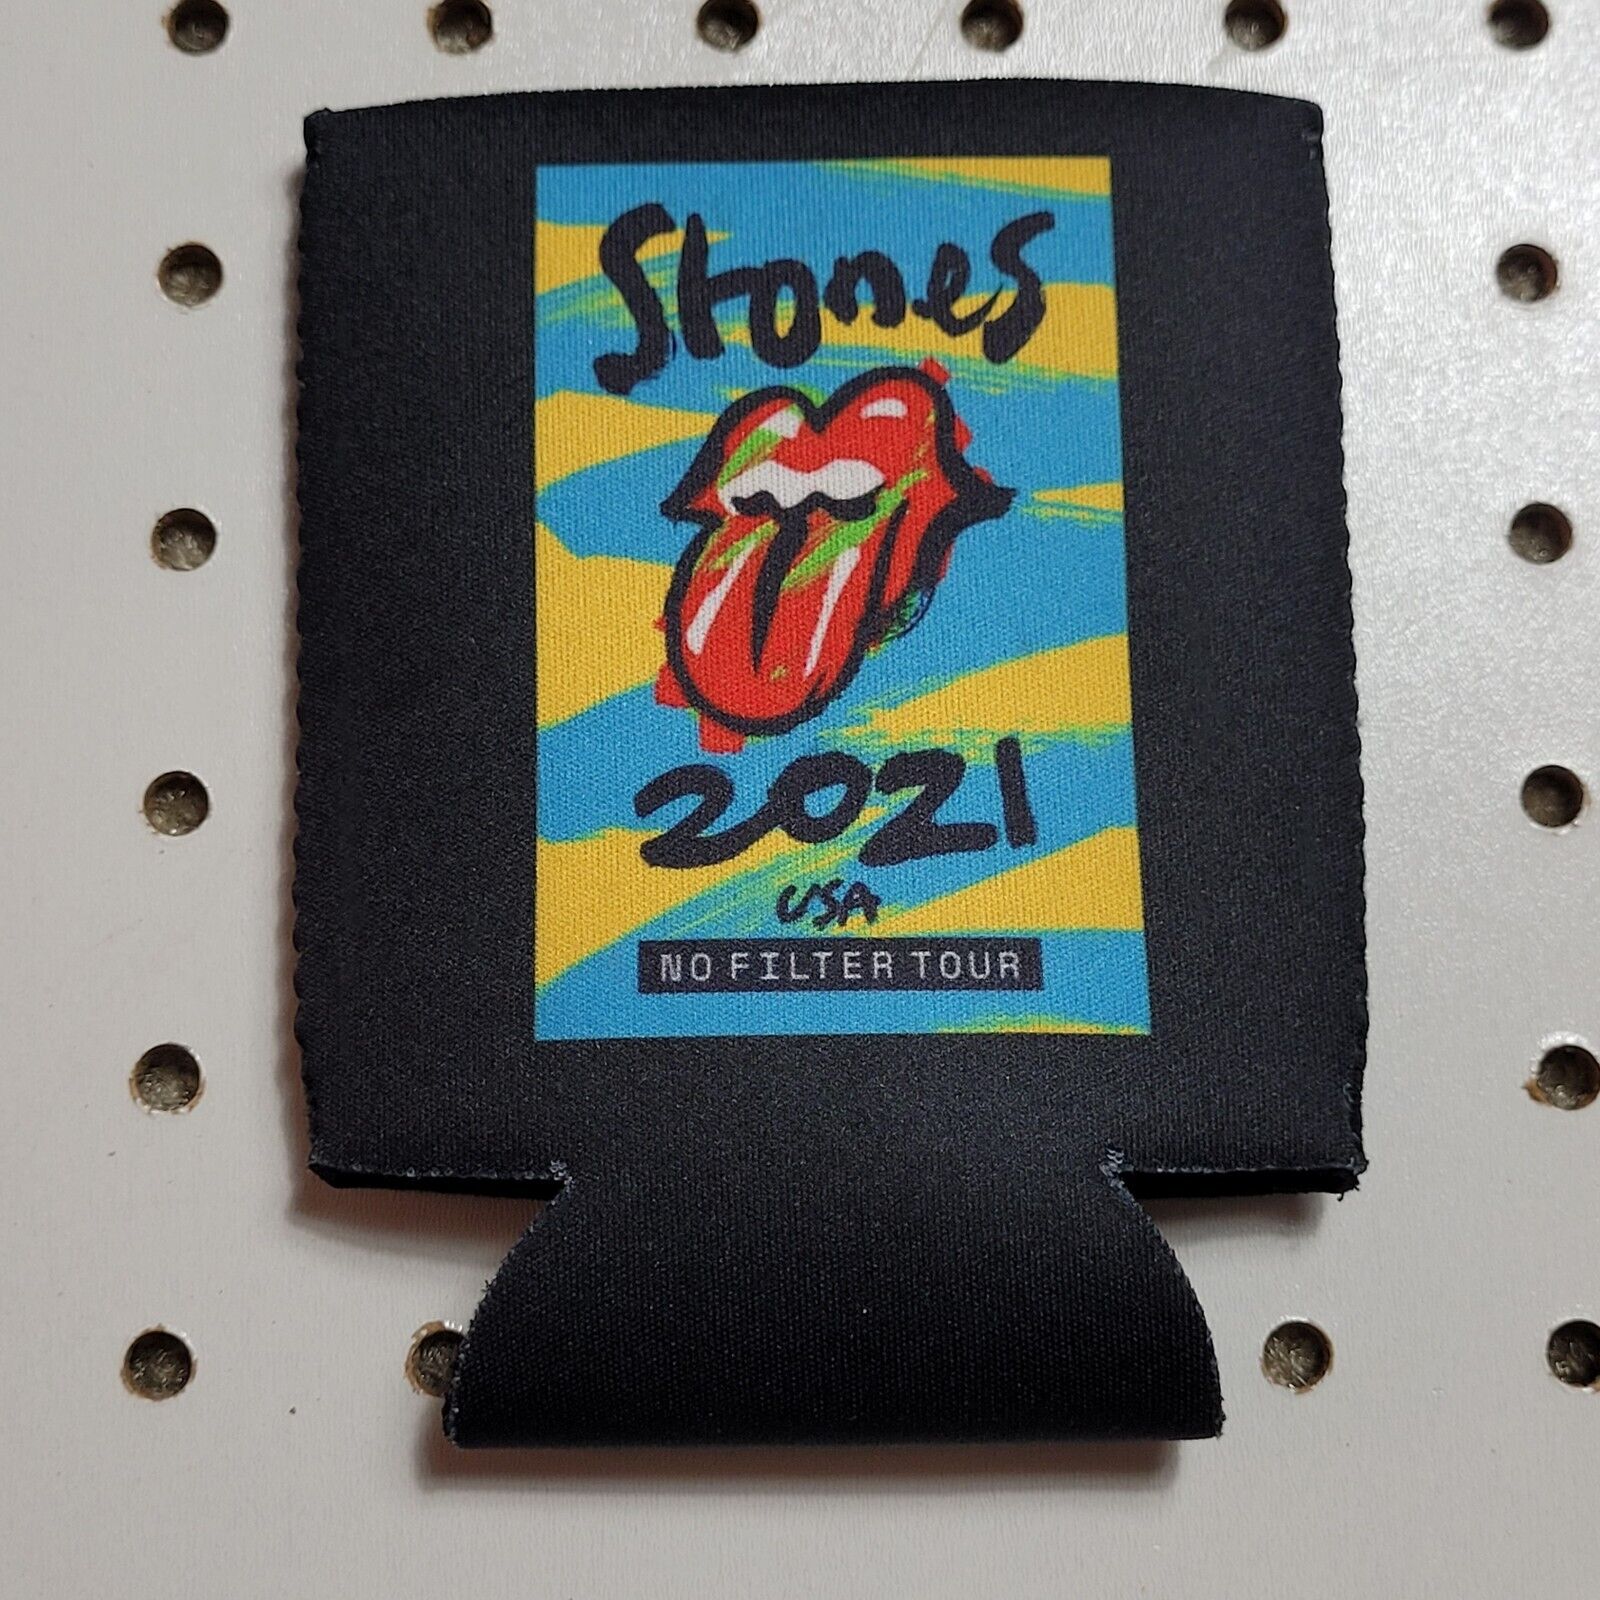 THE ROLLING STONES NO FILTER TOUR 2021 USA PROMO BLACK BEER CAN COOZIE